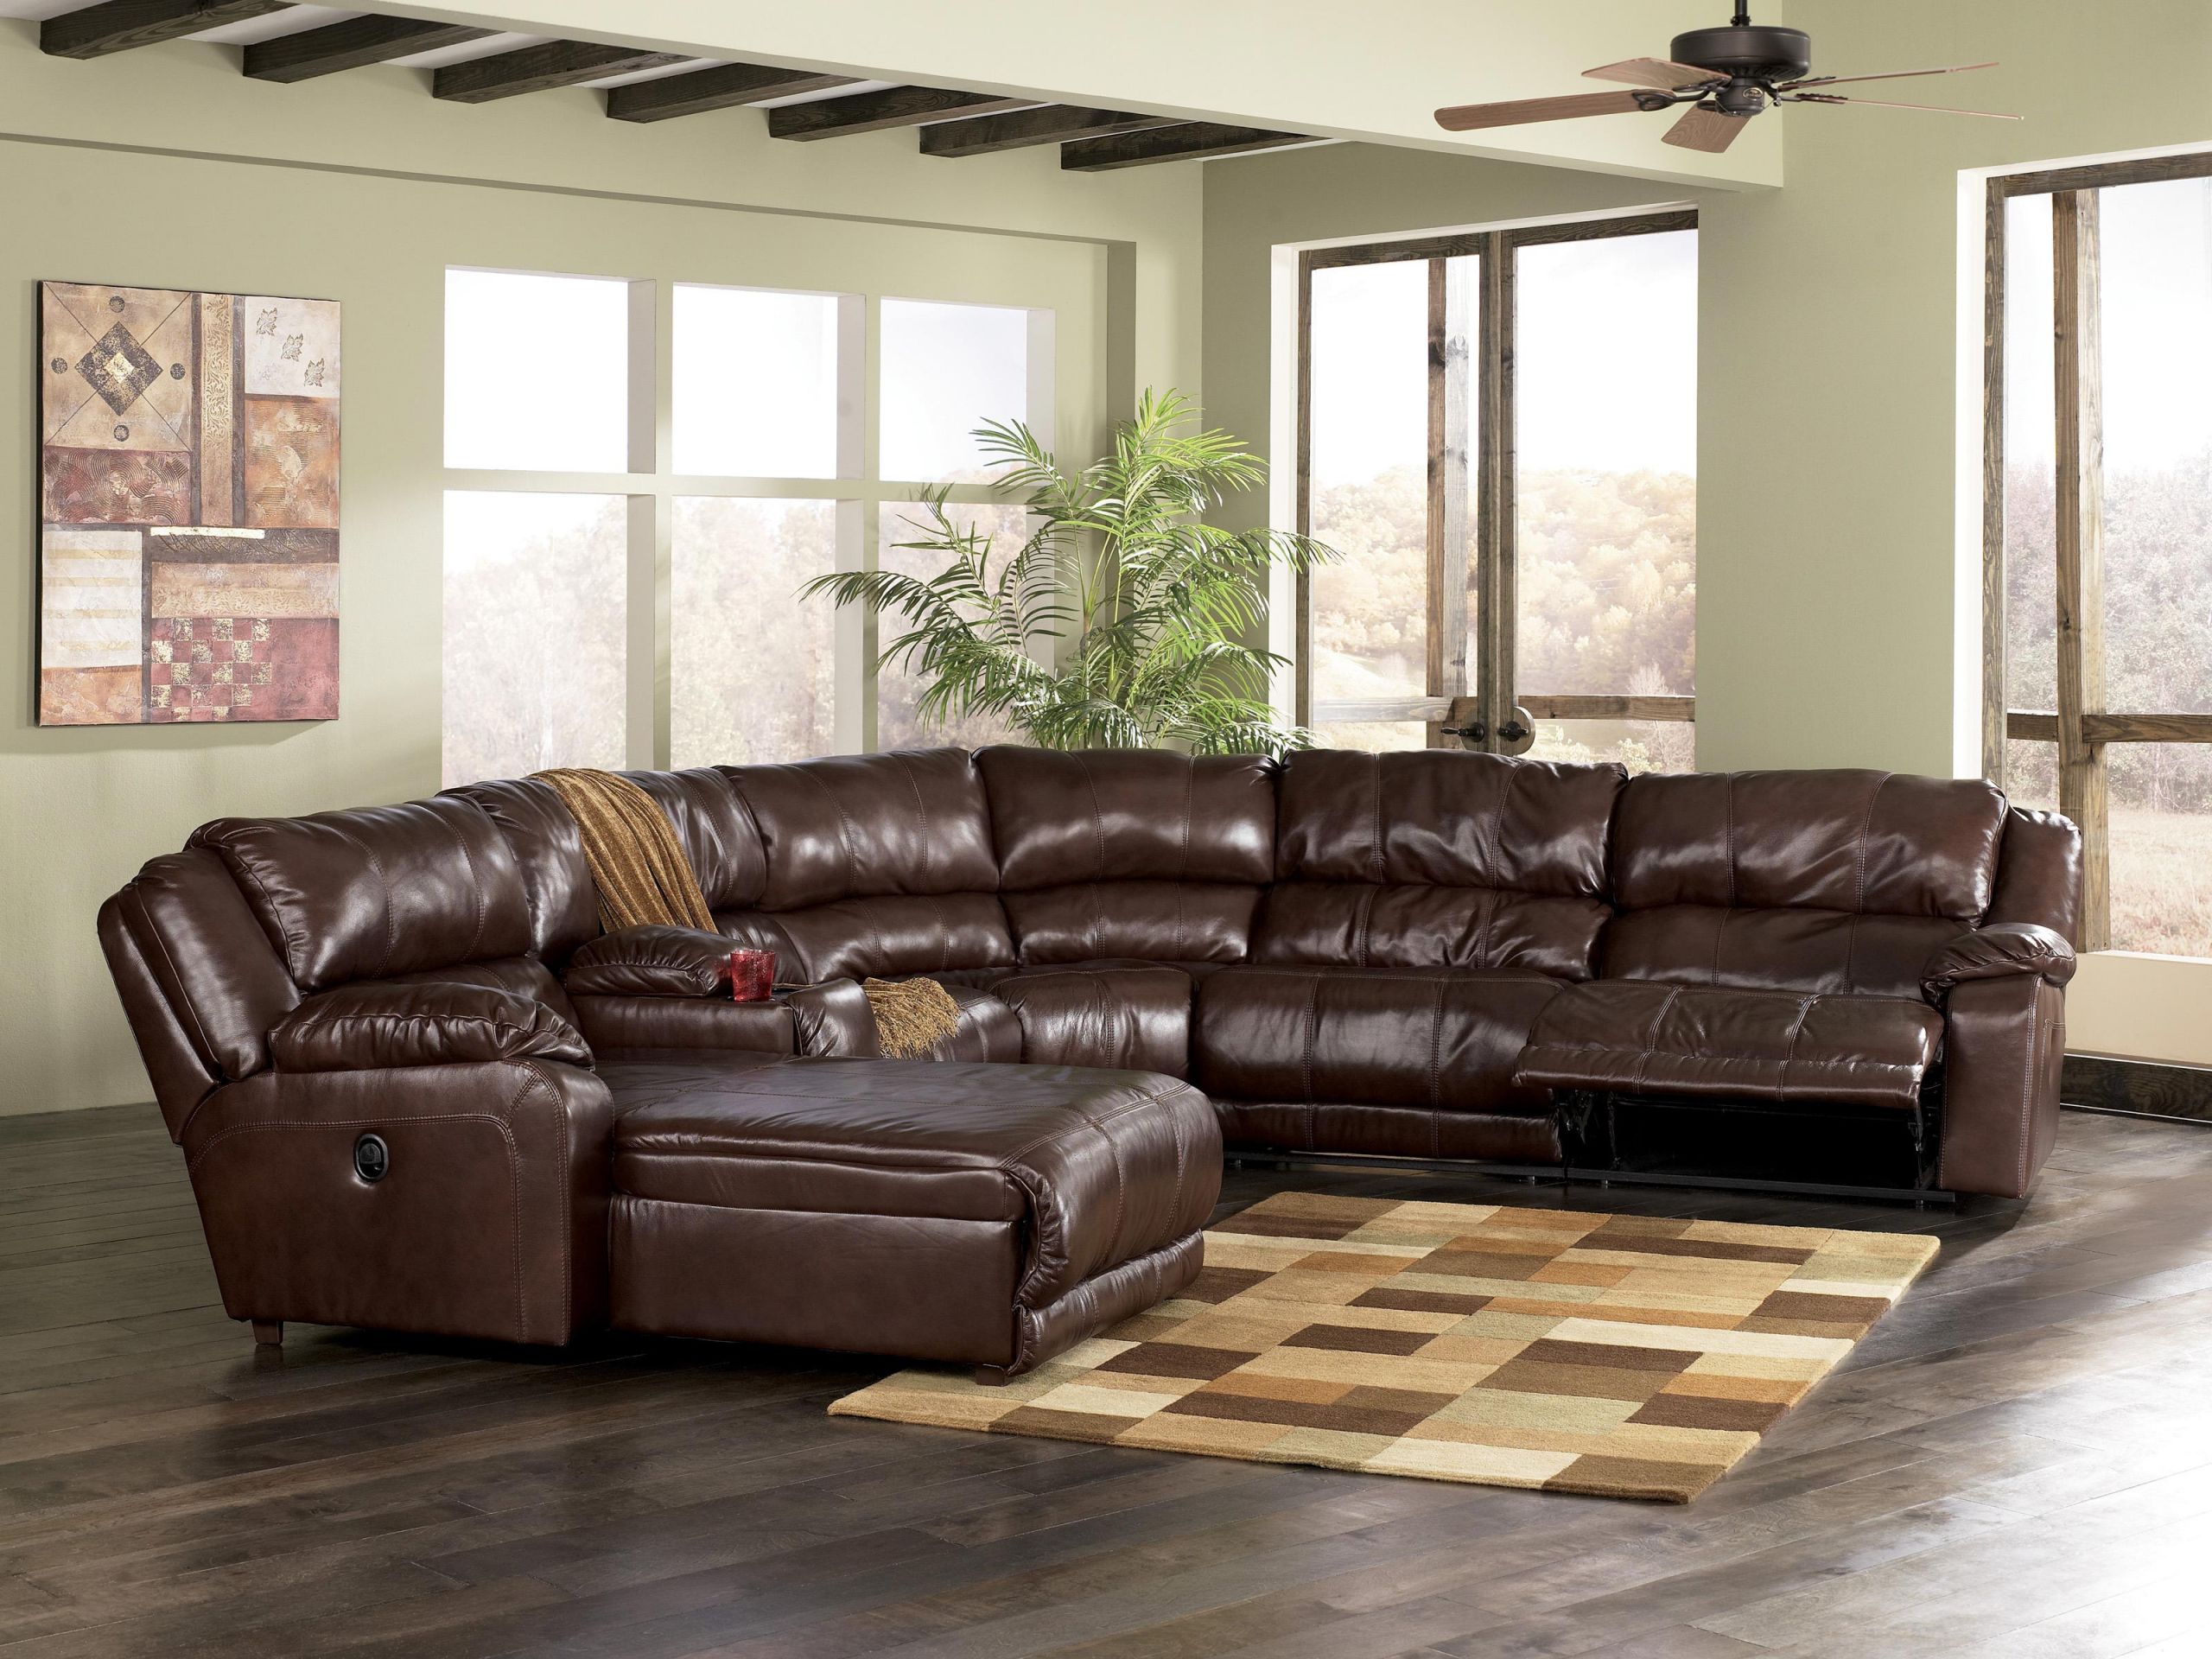 Small Living Room Sectionals
 Living Room Ideas with Sectionals Sofa for Small Living